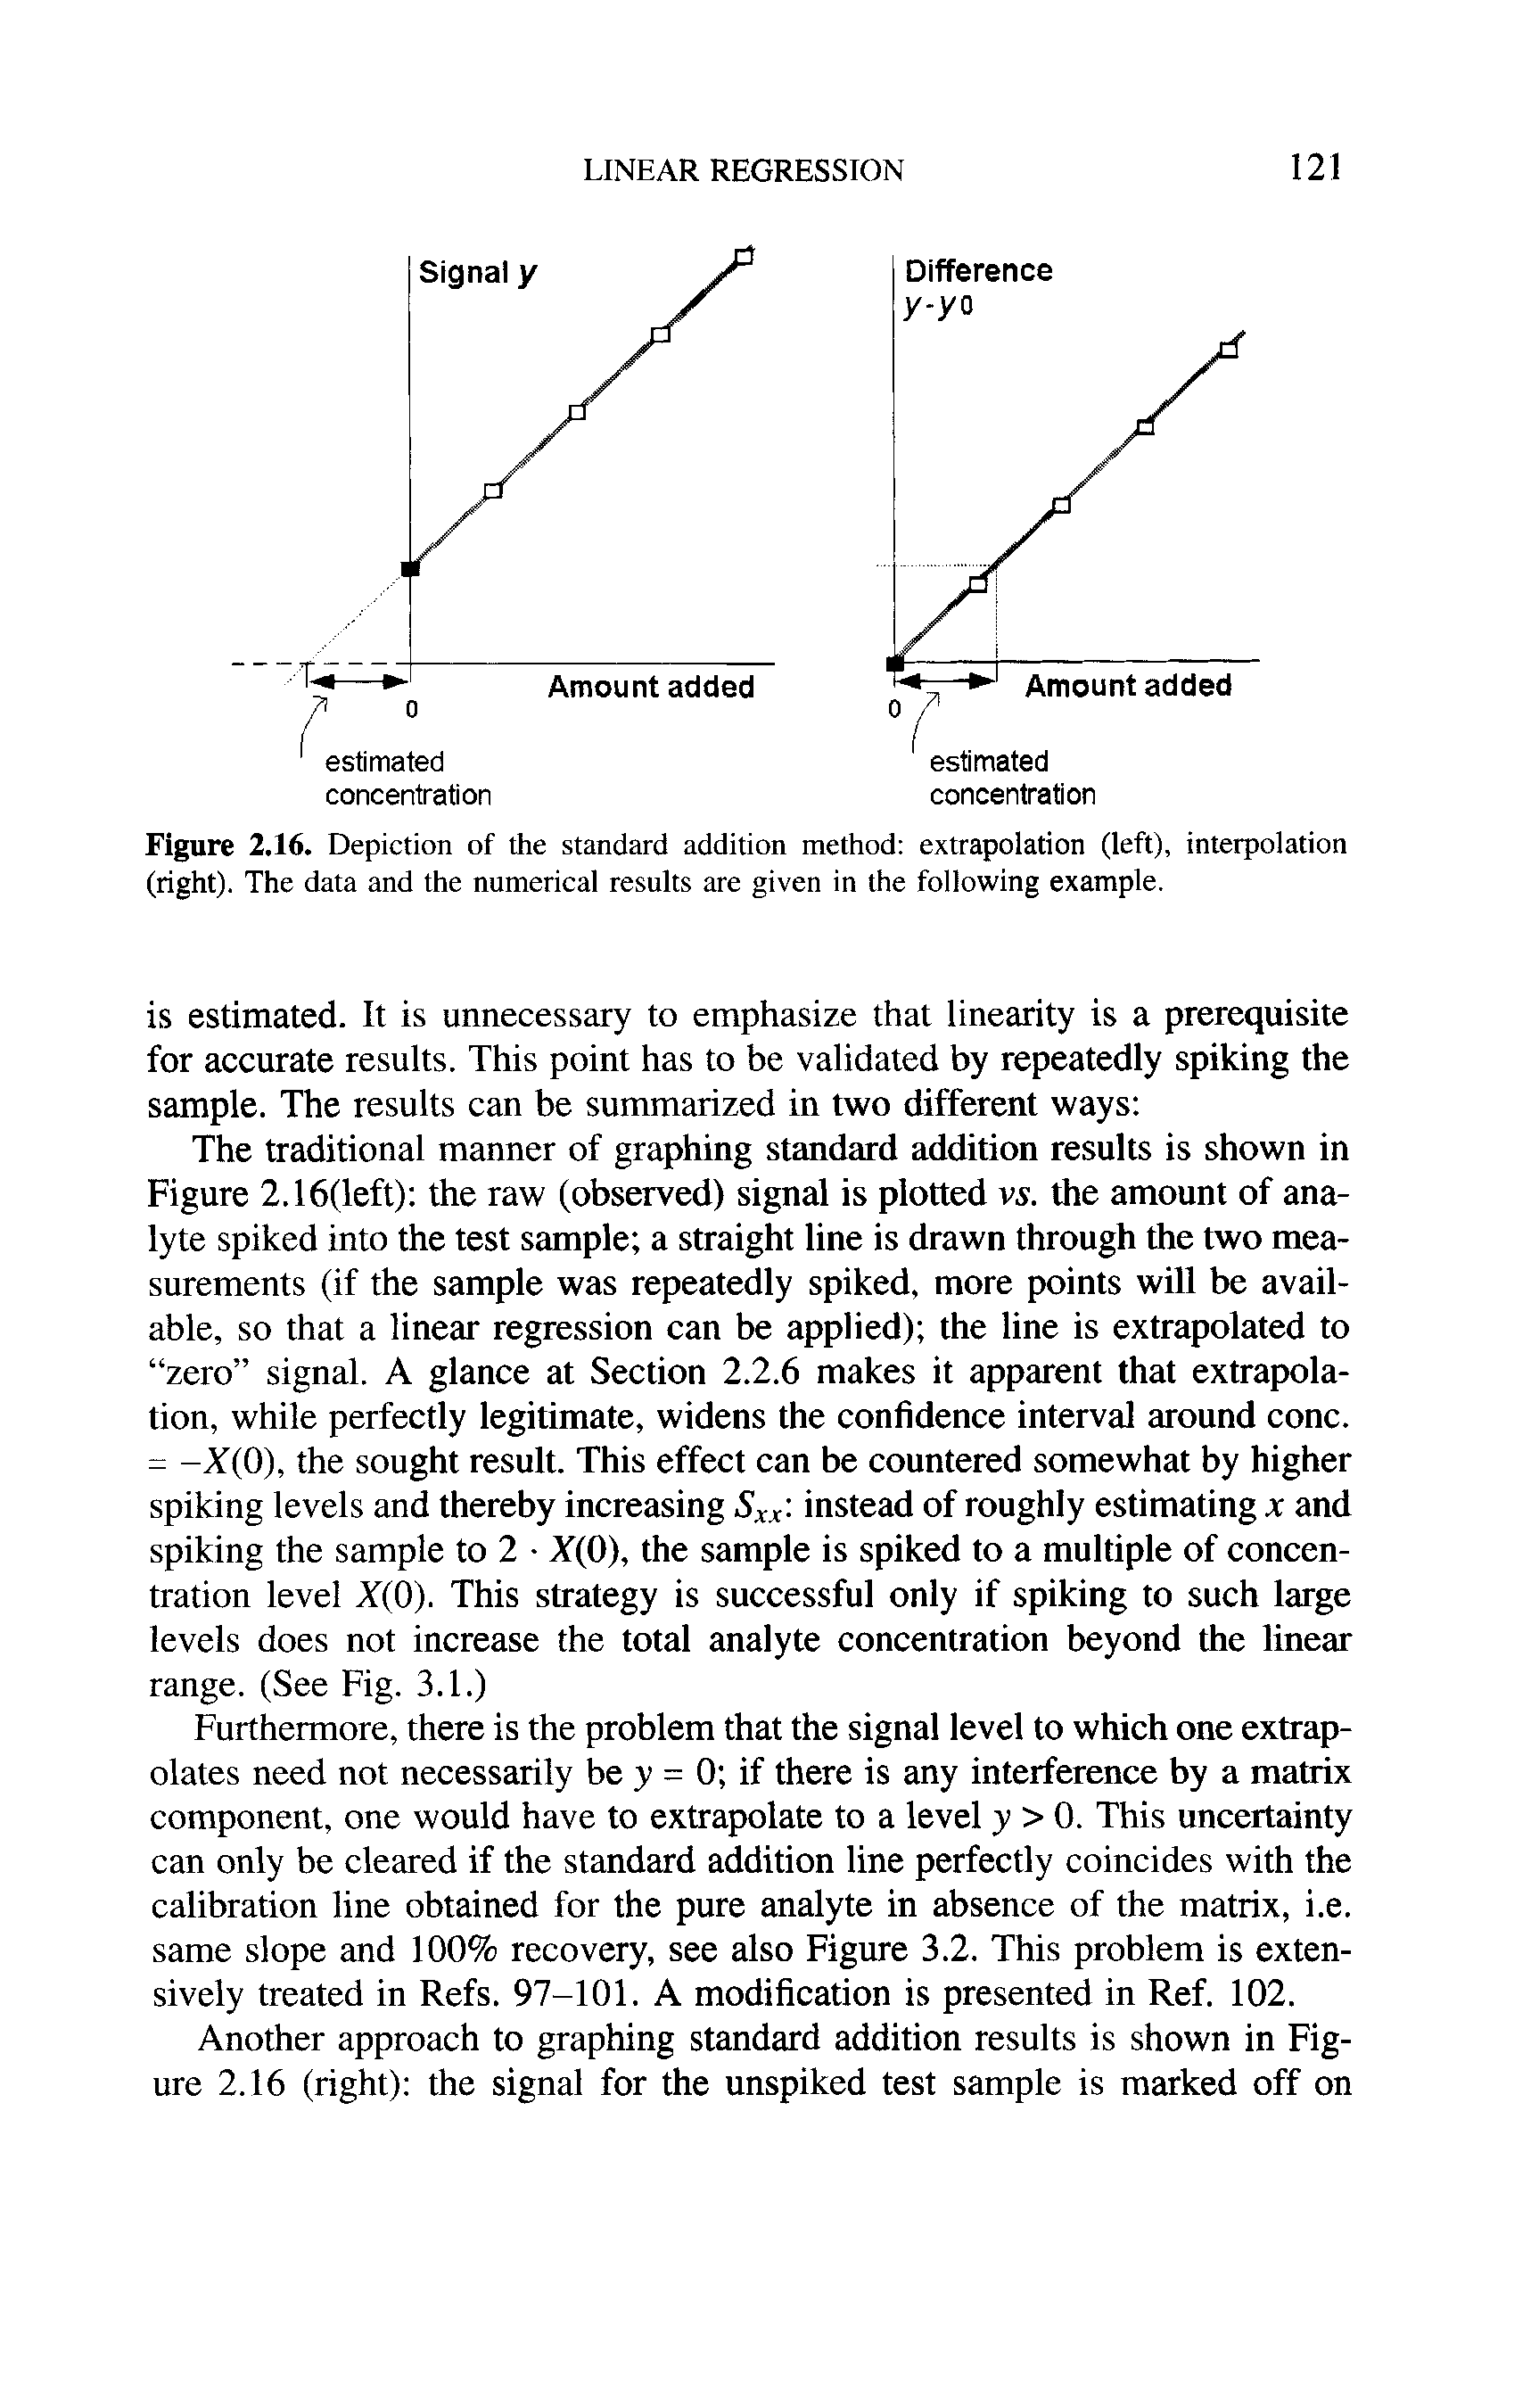 Figure 2.16. Depiction of the standard addition method extrapolation (left), interpolation (right). The data and the numerical results are given in the following example.